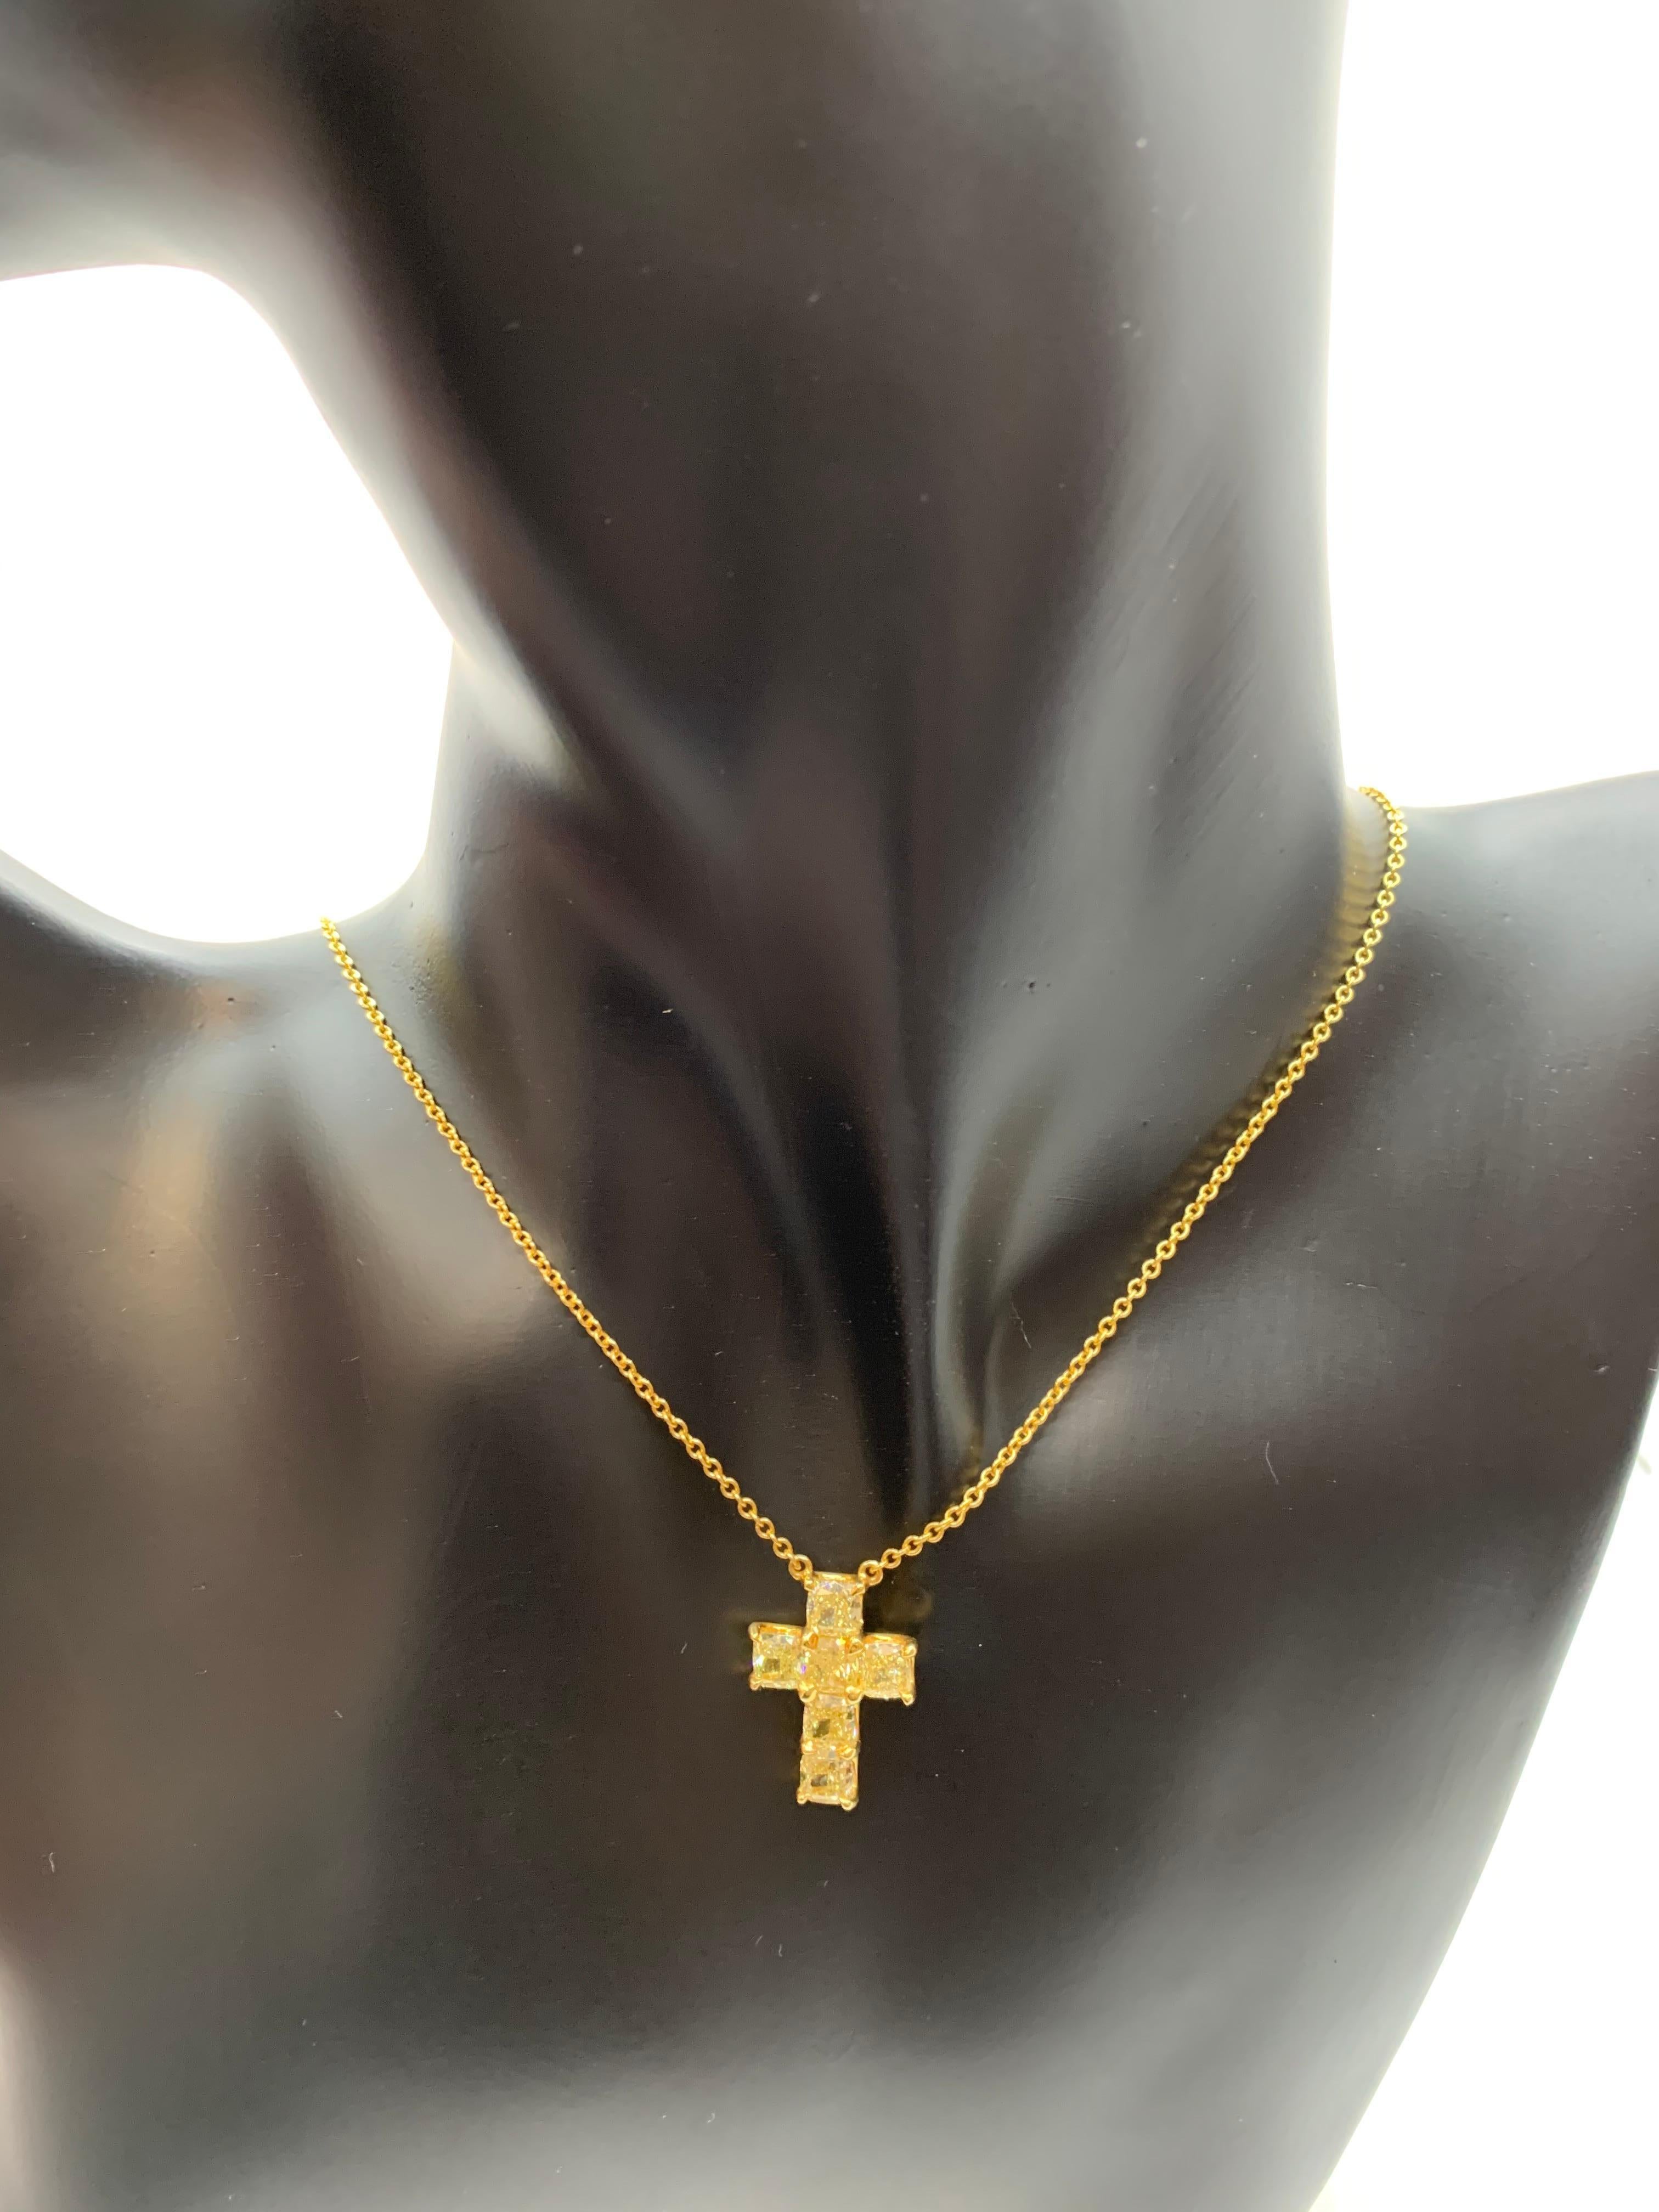 This cross features 6 perfectly matched Cushion Cut  Yellow Diamonds weighing 3.44 Carats and set in a minimalistic setting that lets light pass from all directions. 
Set in 18 Karat Yellow Gold.
Chain can be worn at the neck bone at 15.5 inches or